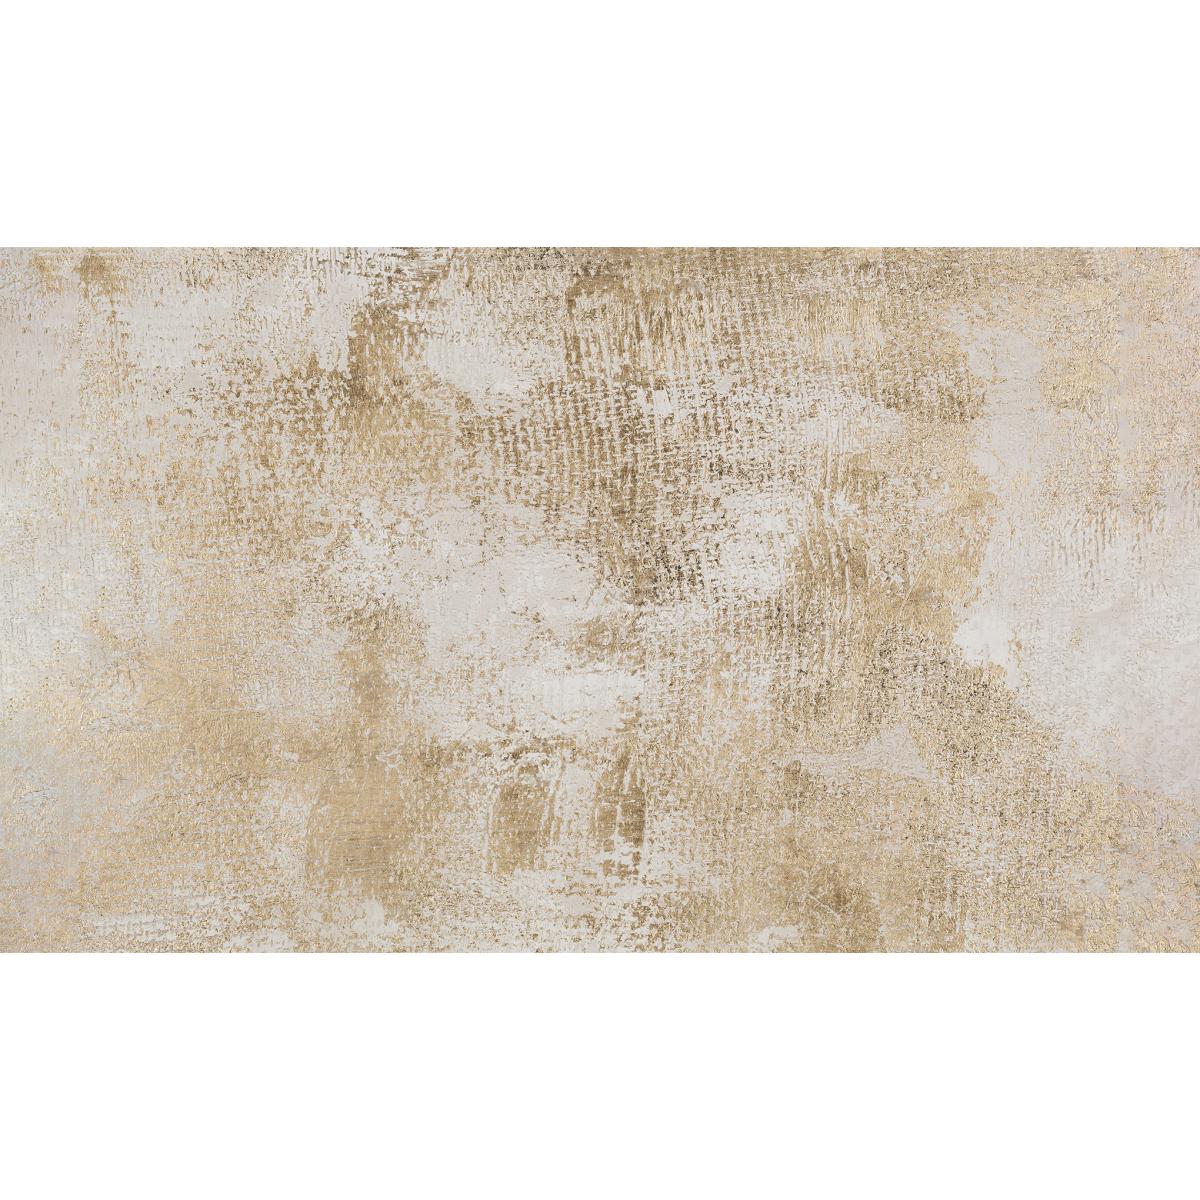 Panoramic wallpaper Surface 1661 - Collection Acte-Deco